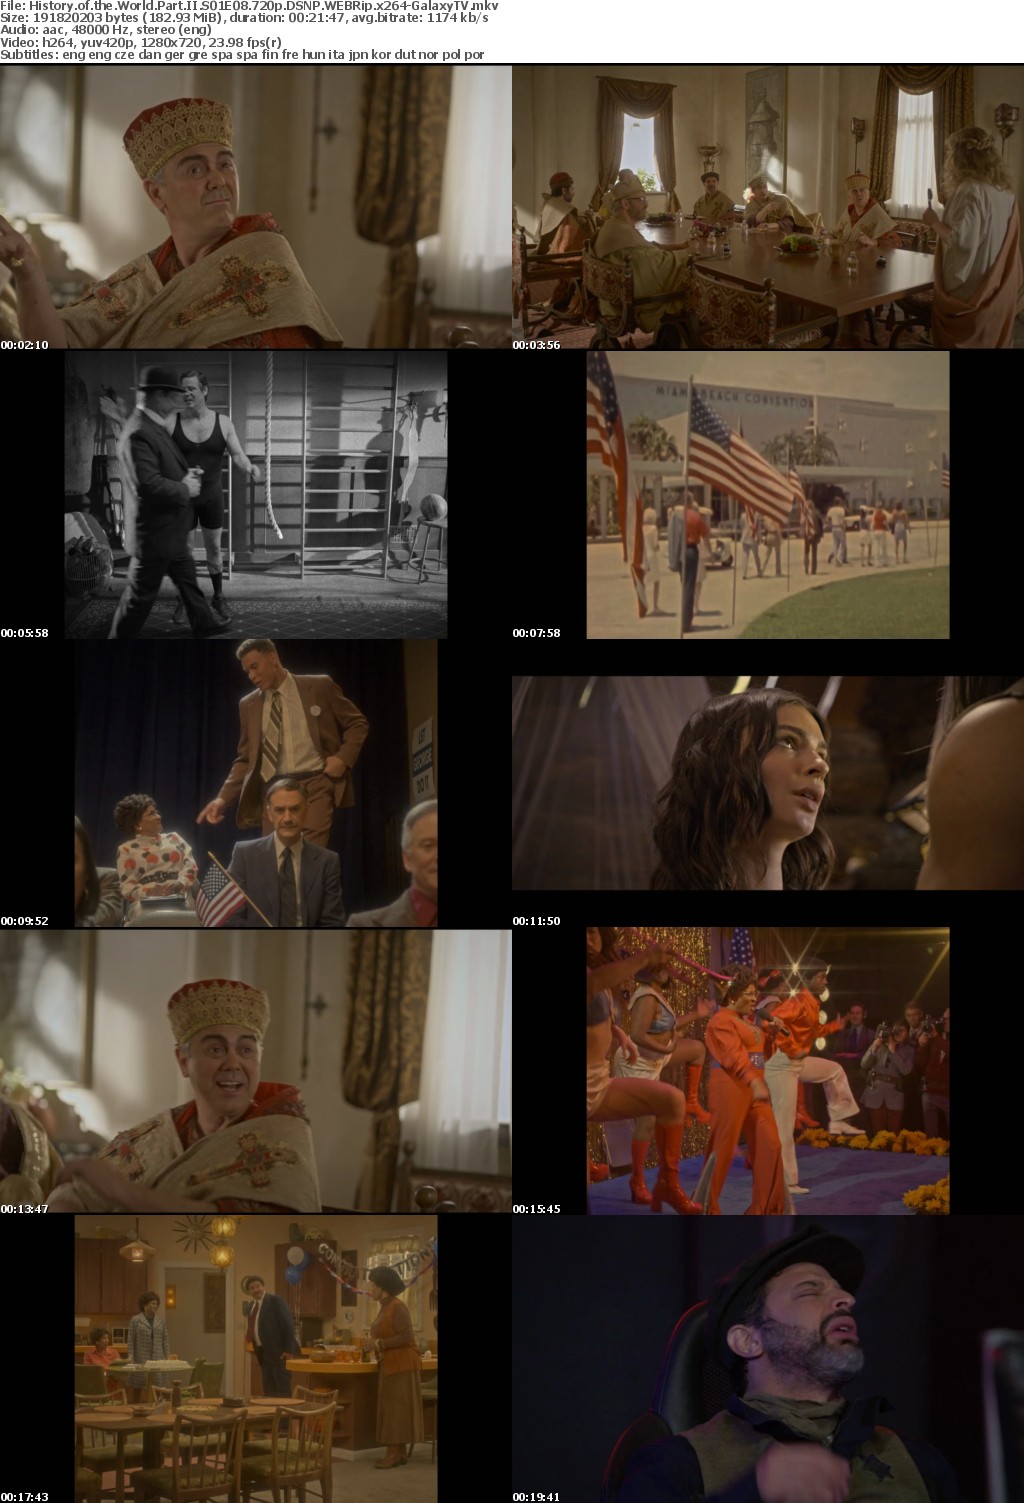 History of the World Part II S01 COMPLETE 720p DSNP WEBRip x264-GalaxyTV